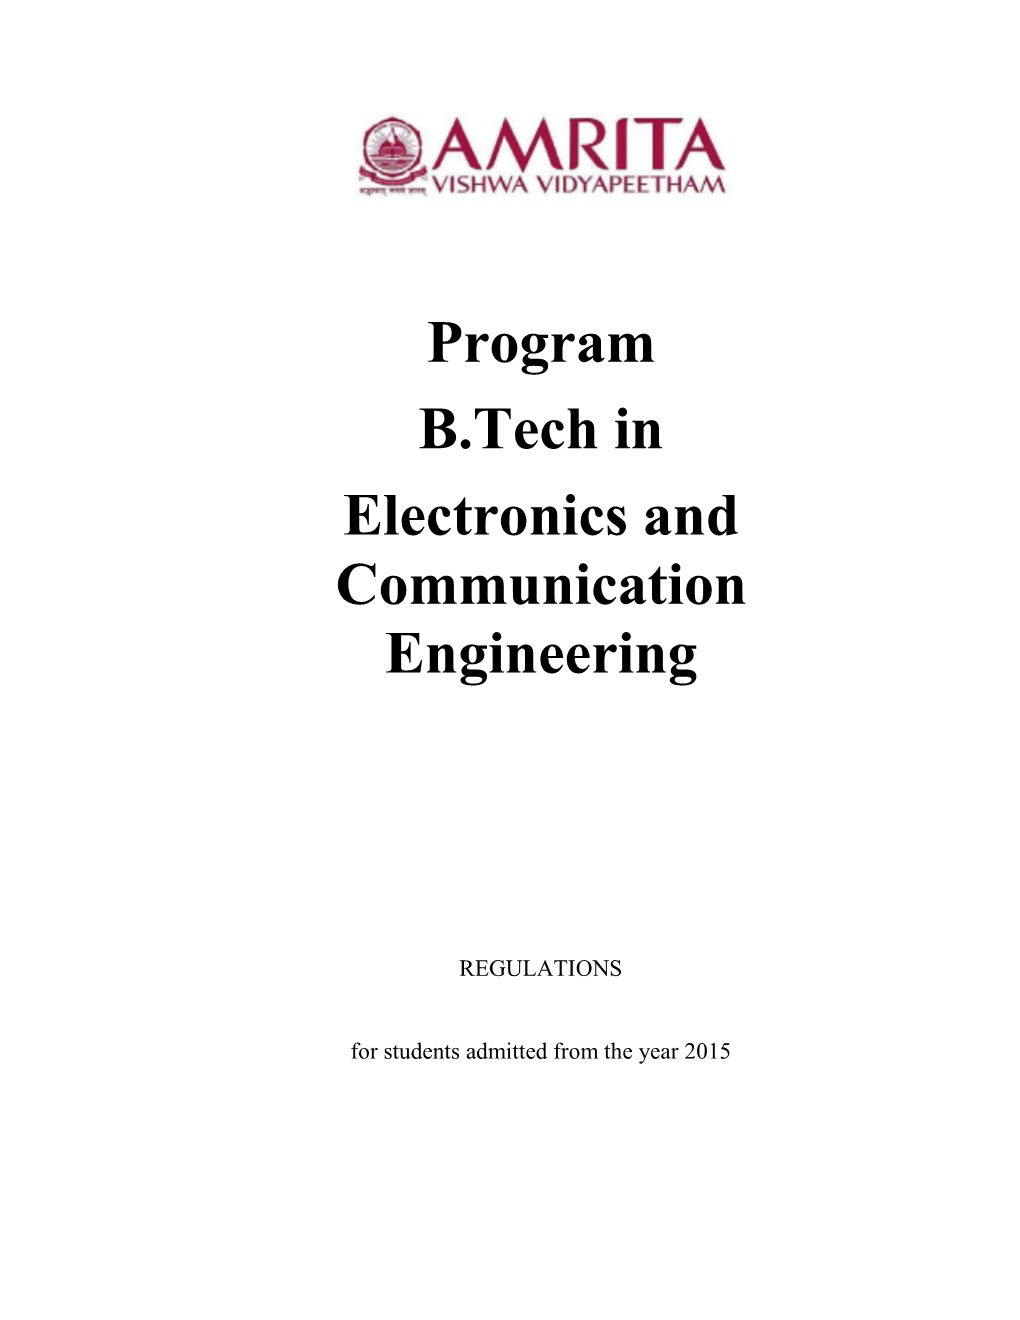 Program B.Tech in Electronics and Communication Engineering